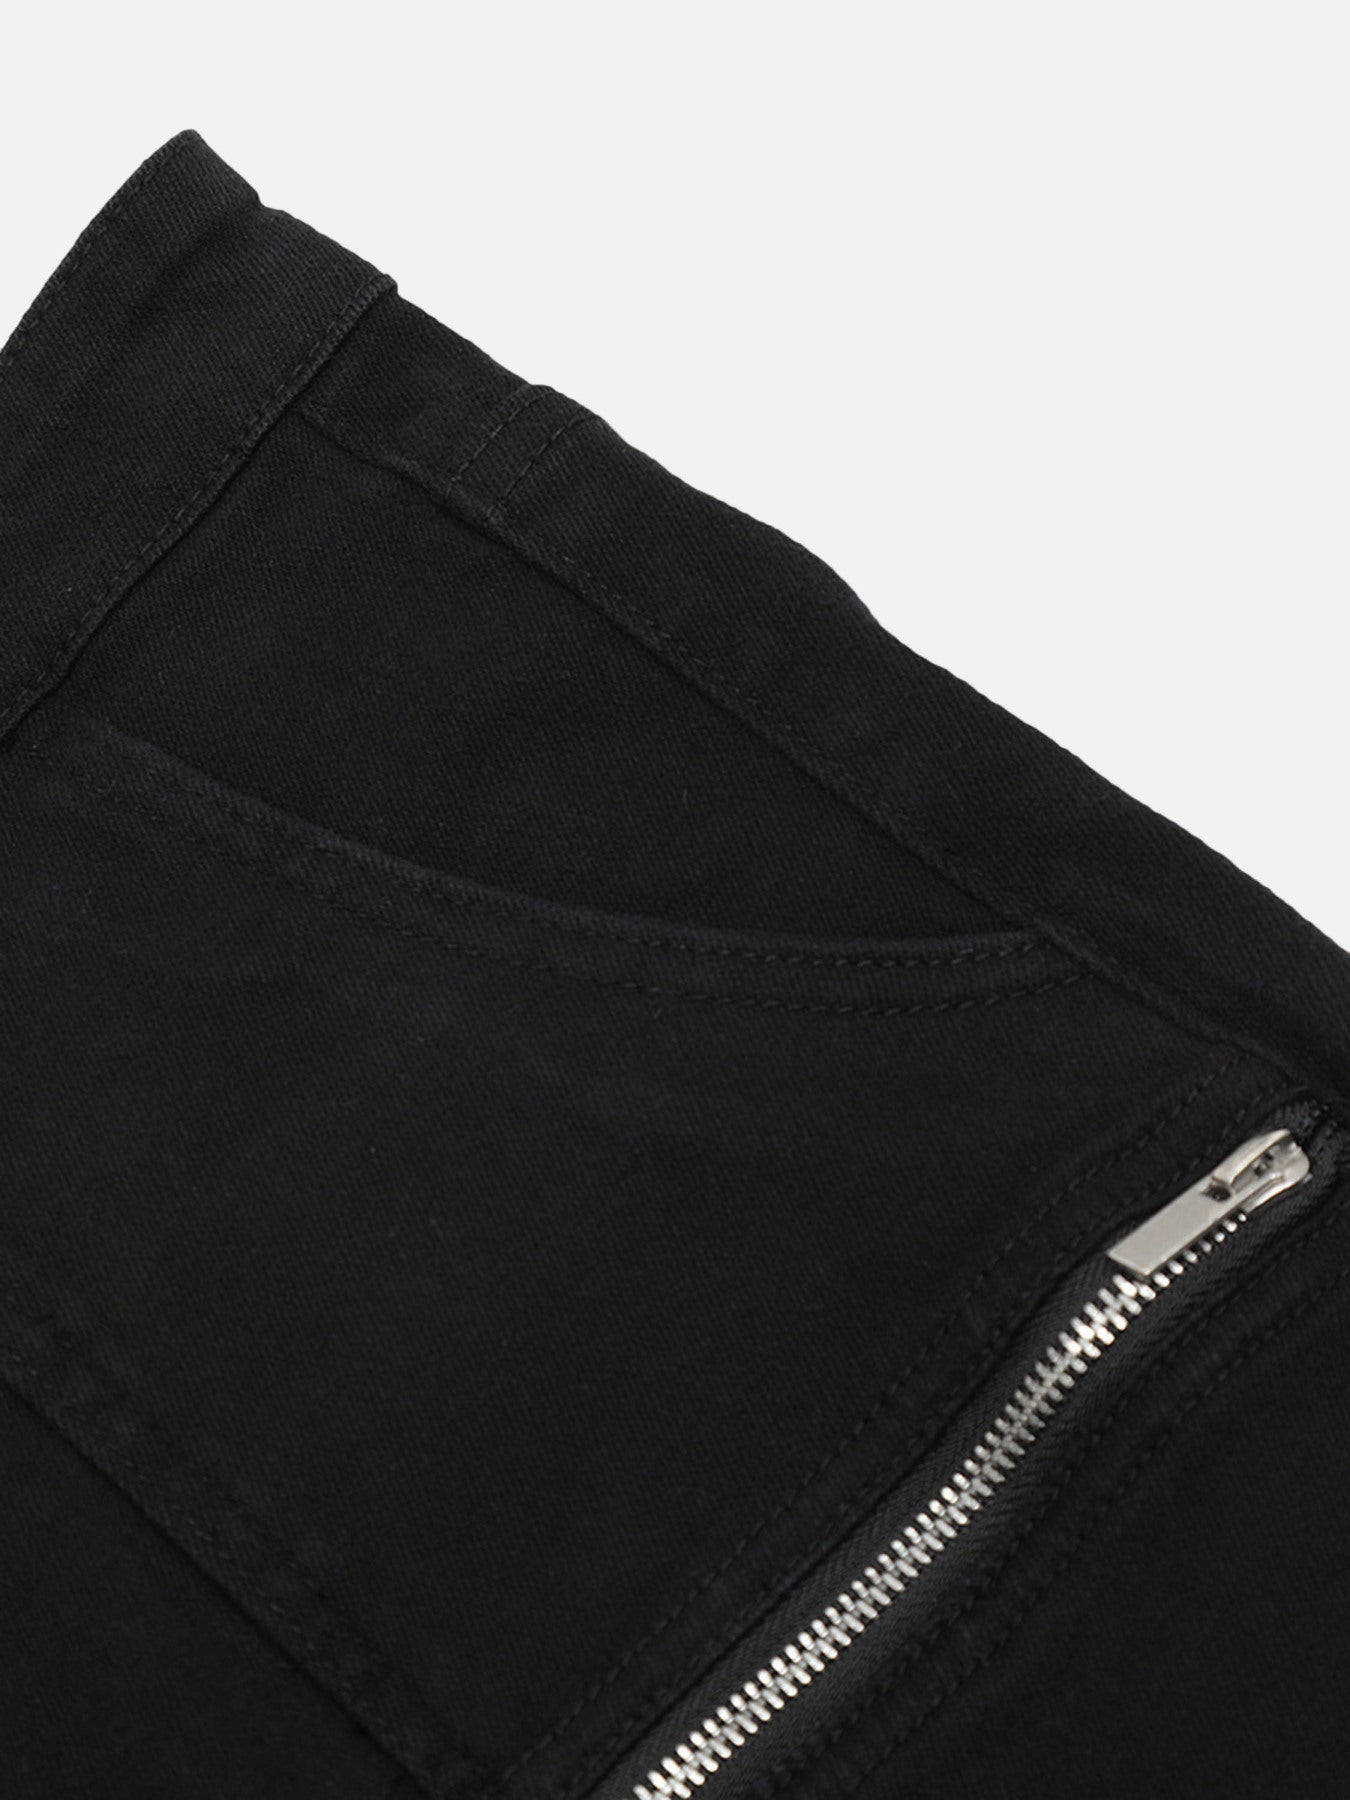 The Supermade Work Pocket Jeans